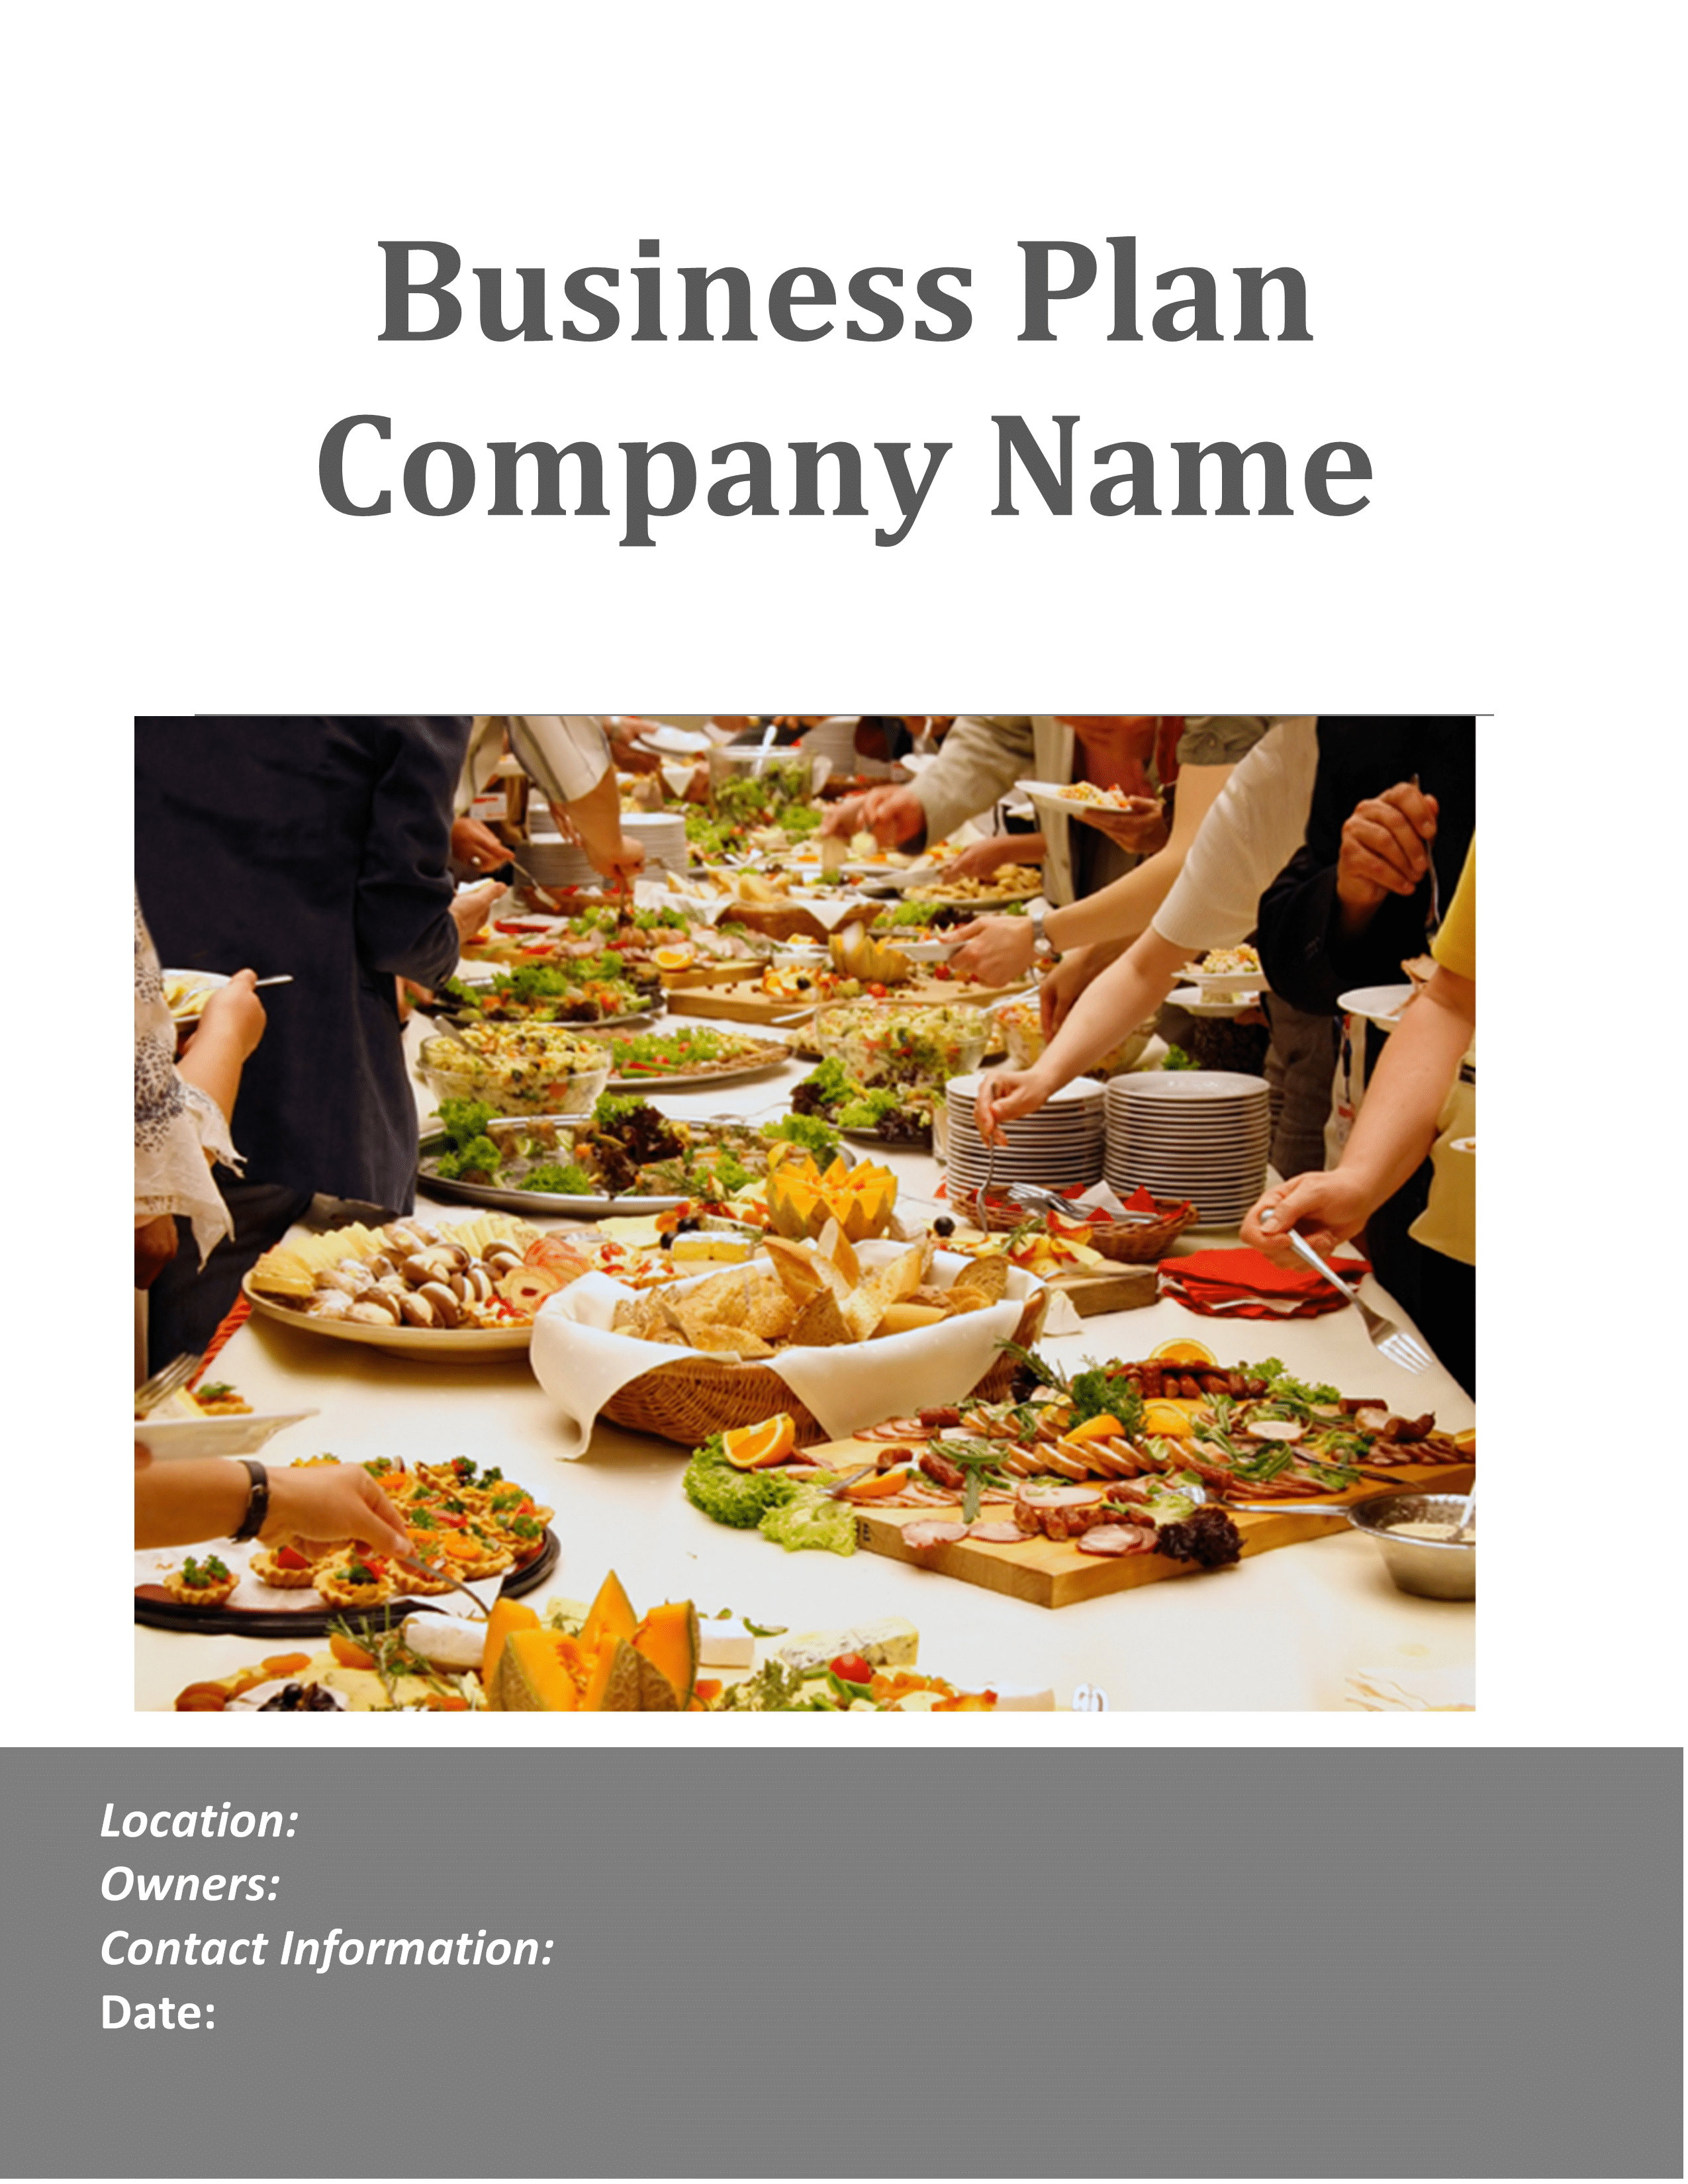 food business plan sample philippines